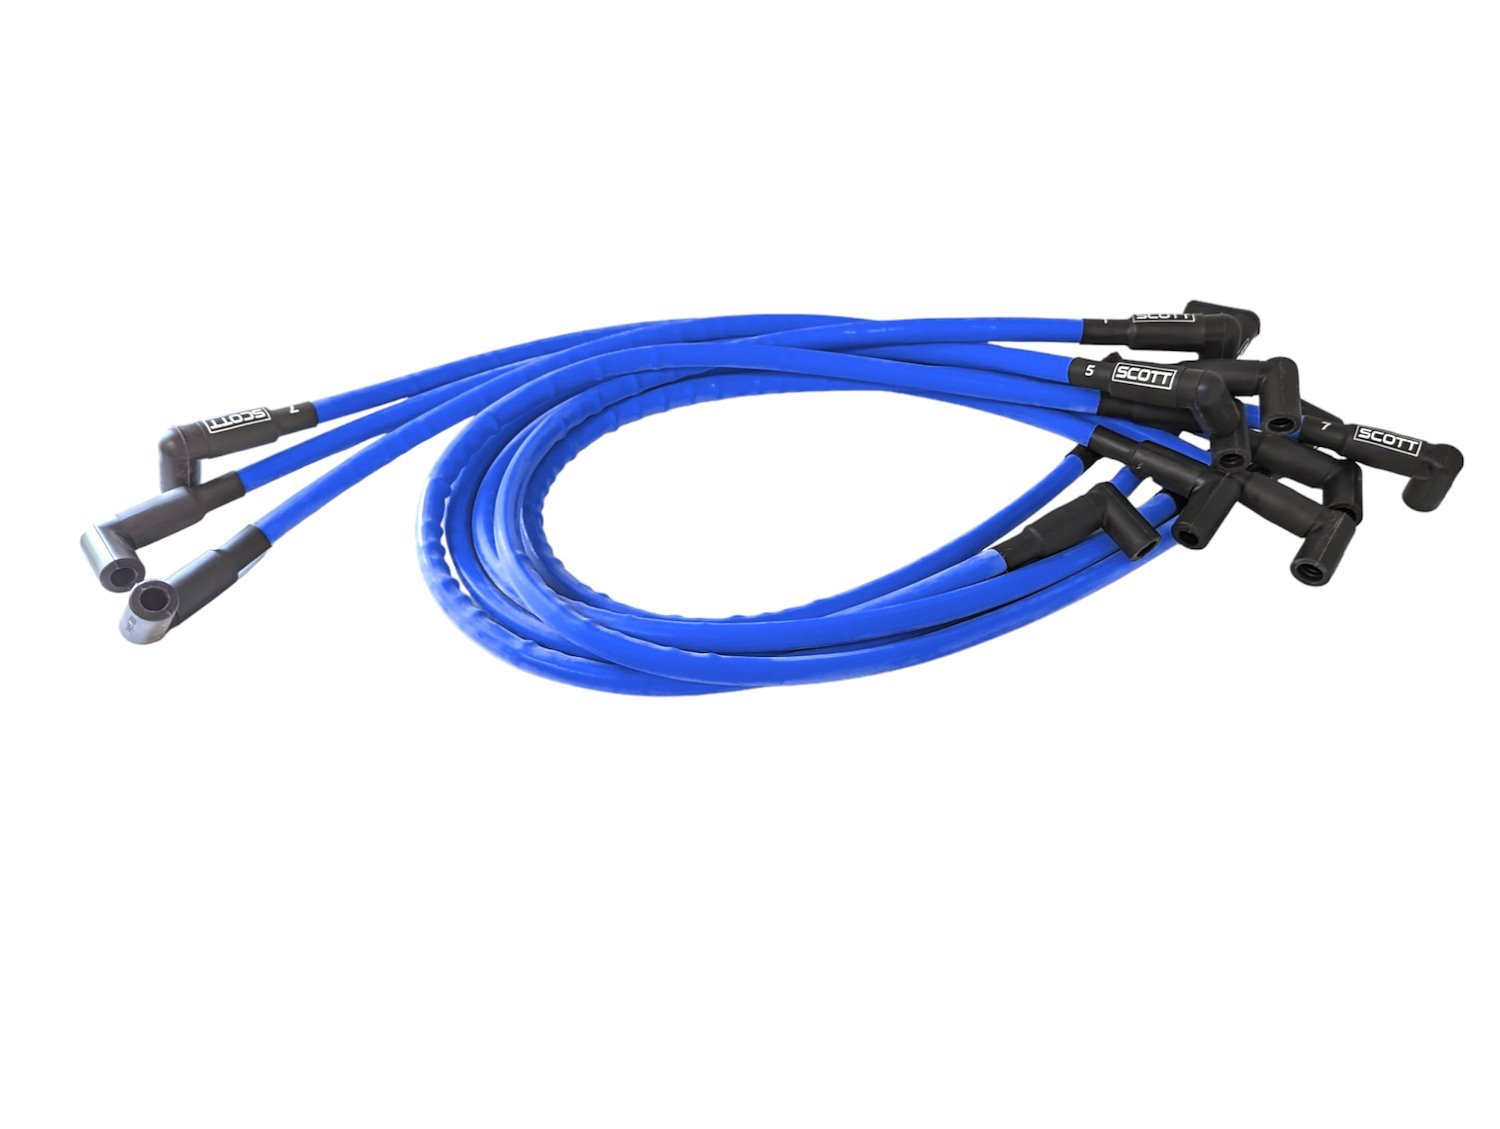 SPW-CH-516-4 High-Performance Silicone-Sleeved Spark Plug Wire Set for Big Block Chevy Dragster, Under Header [Blue]